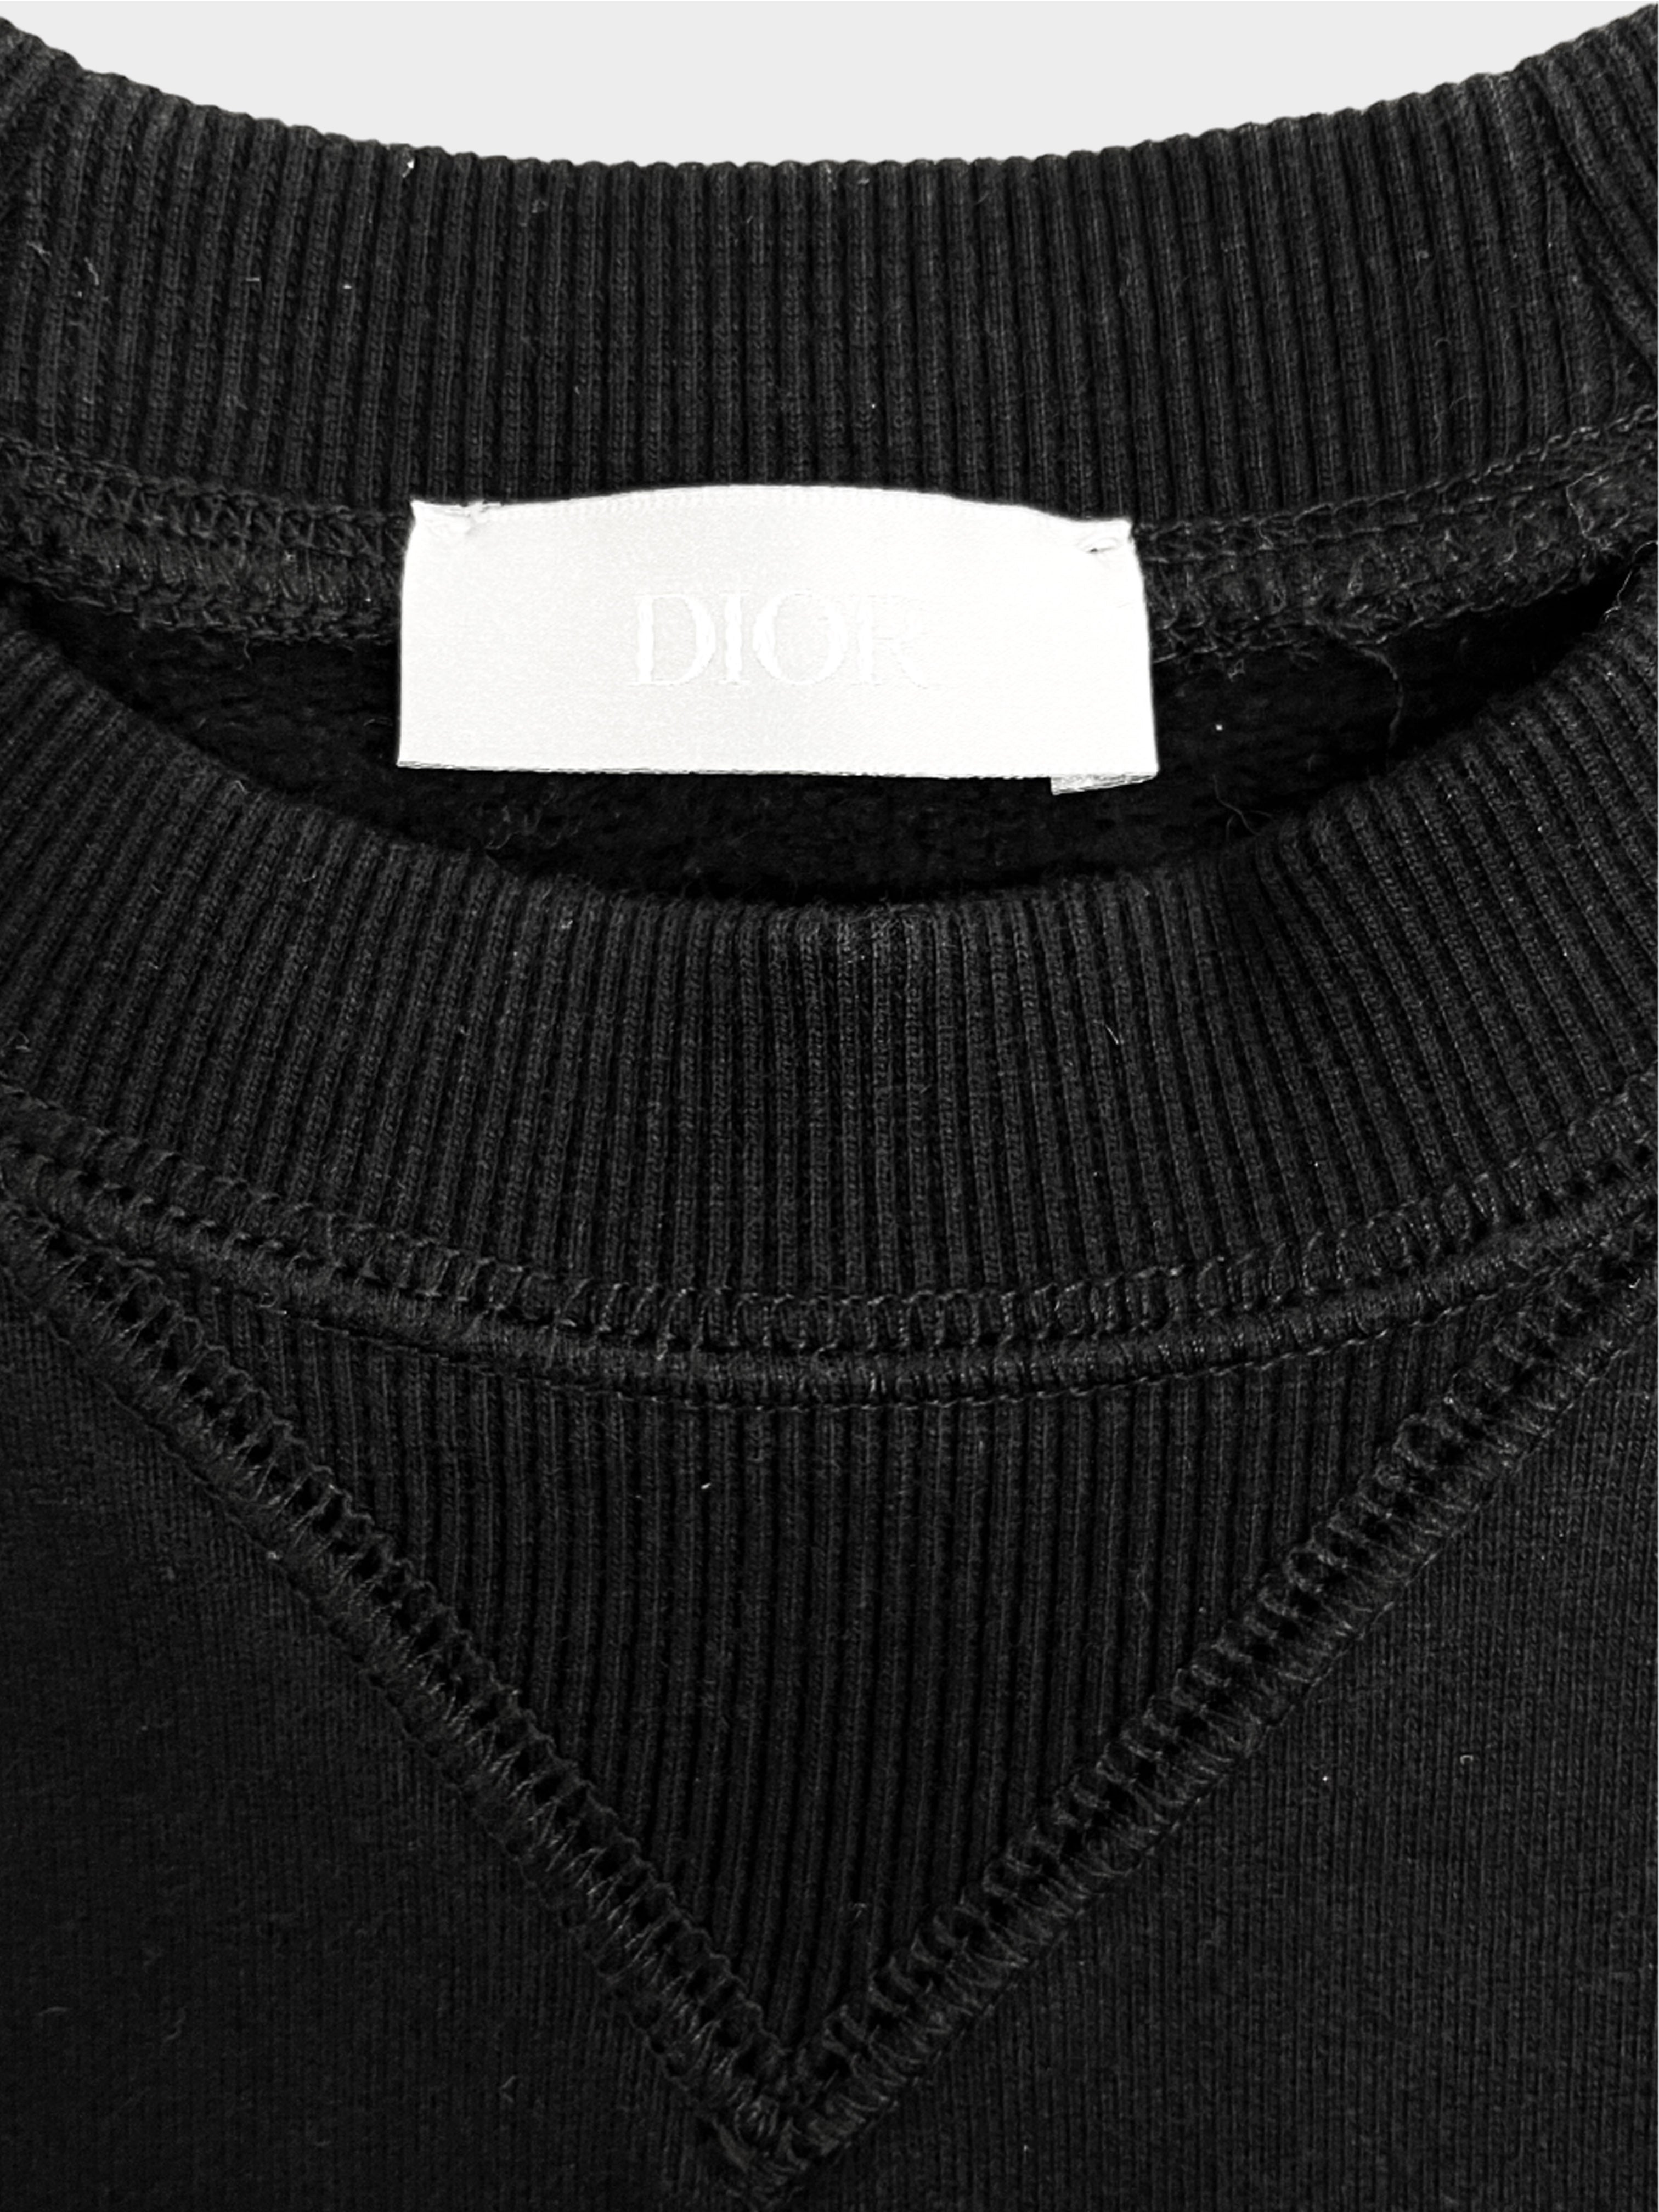 Christian Dior 2021 DIOR x Peter Doig Black Sweater with Embroidered Logo